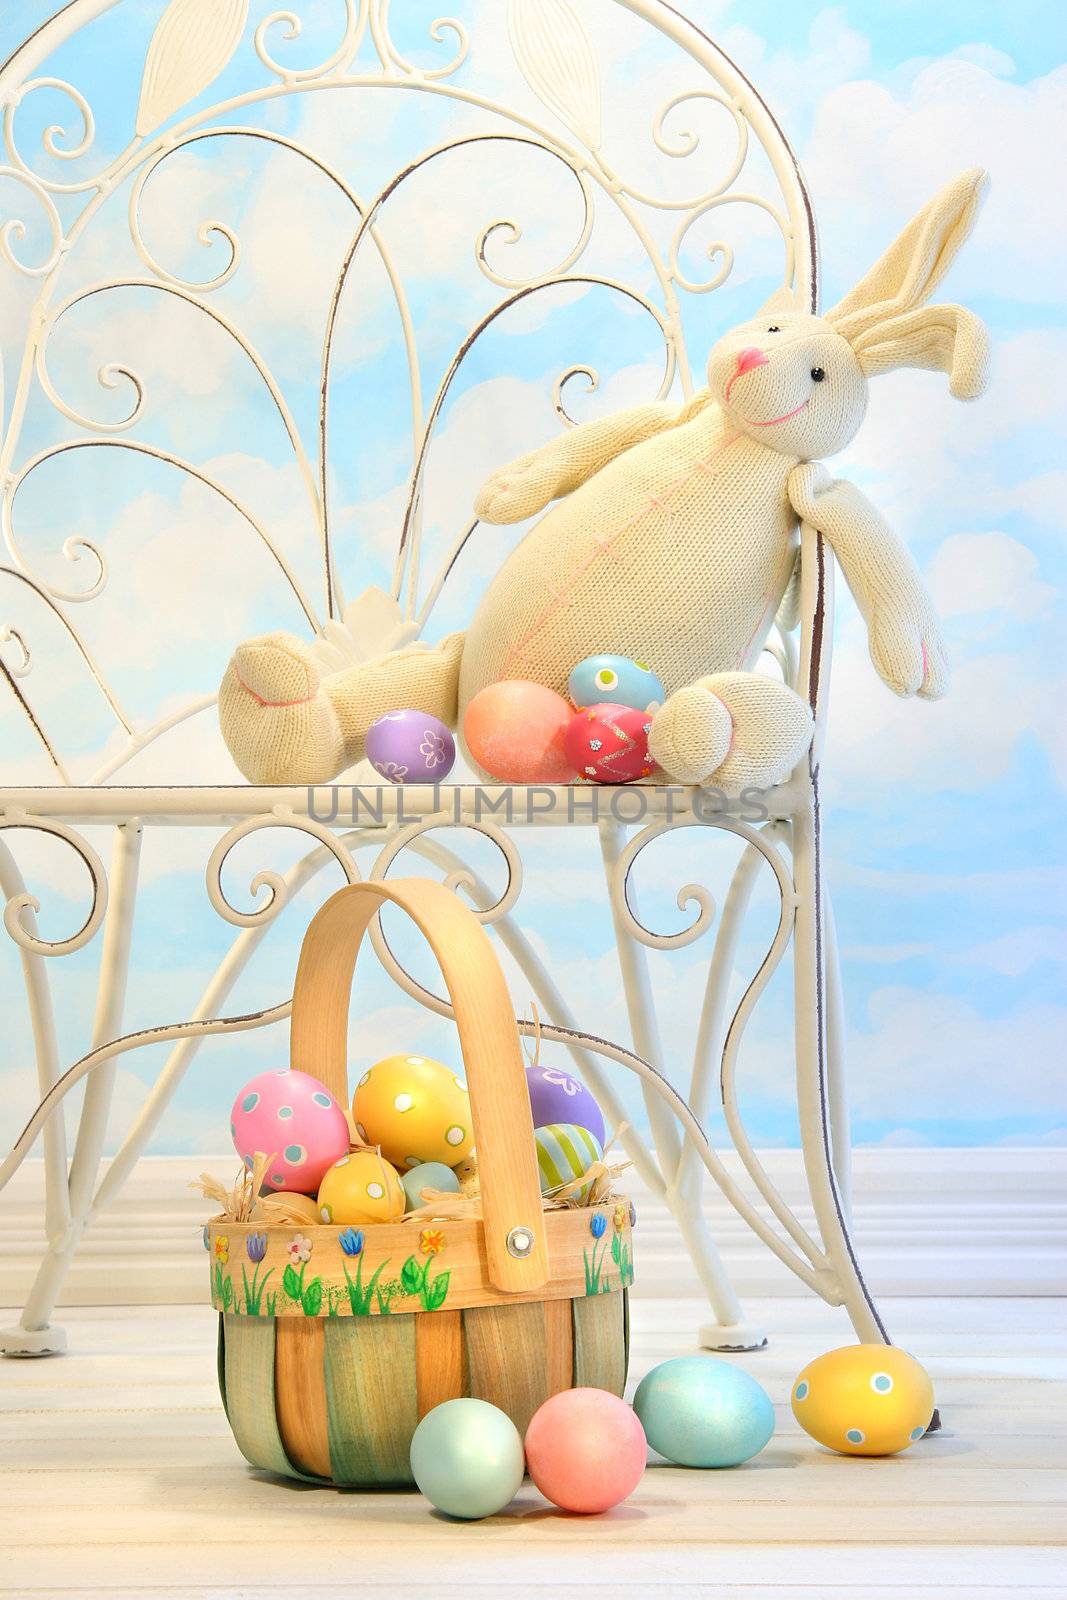 Easter bunny with eggs on chair by Sandralise